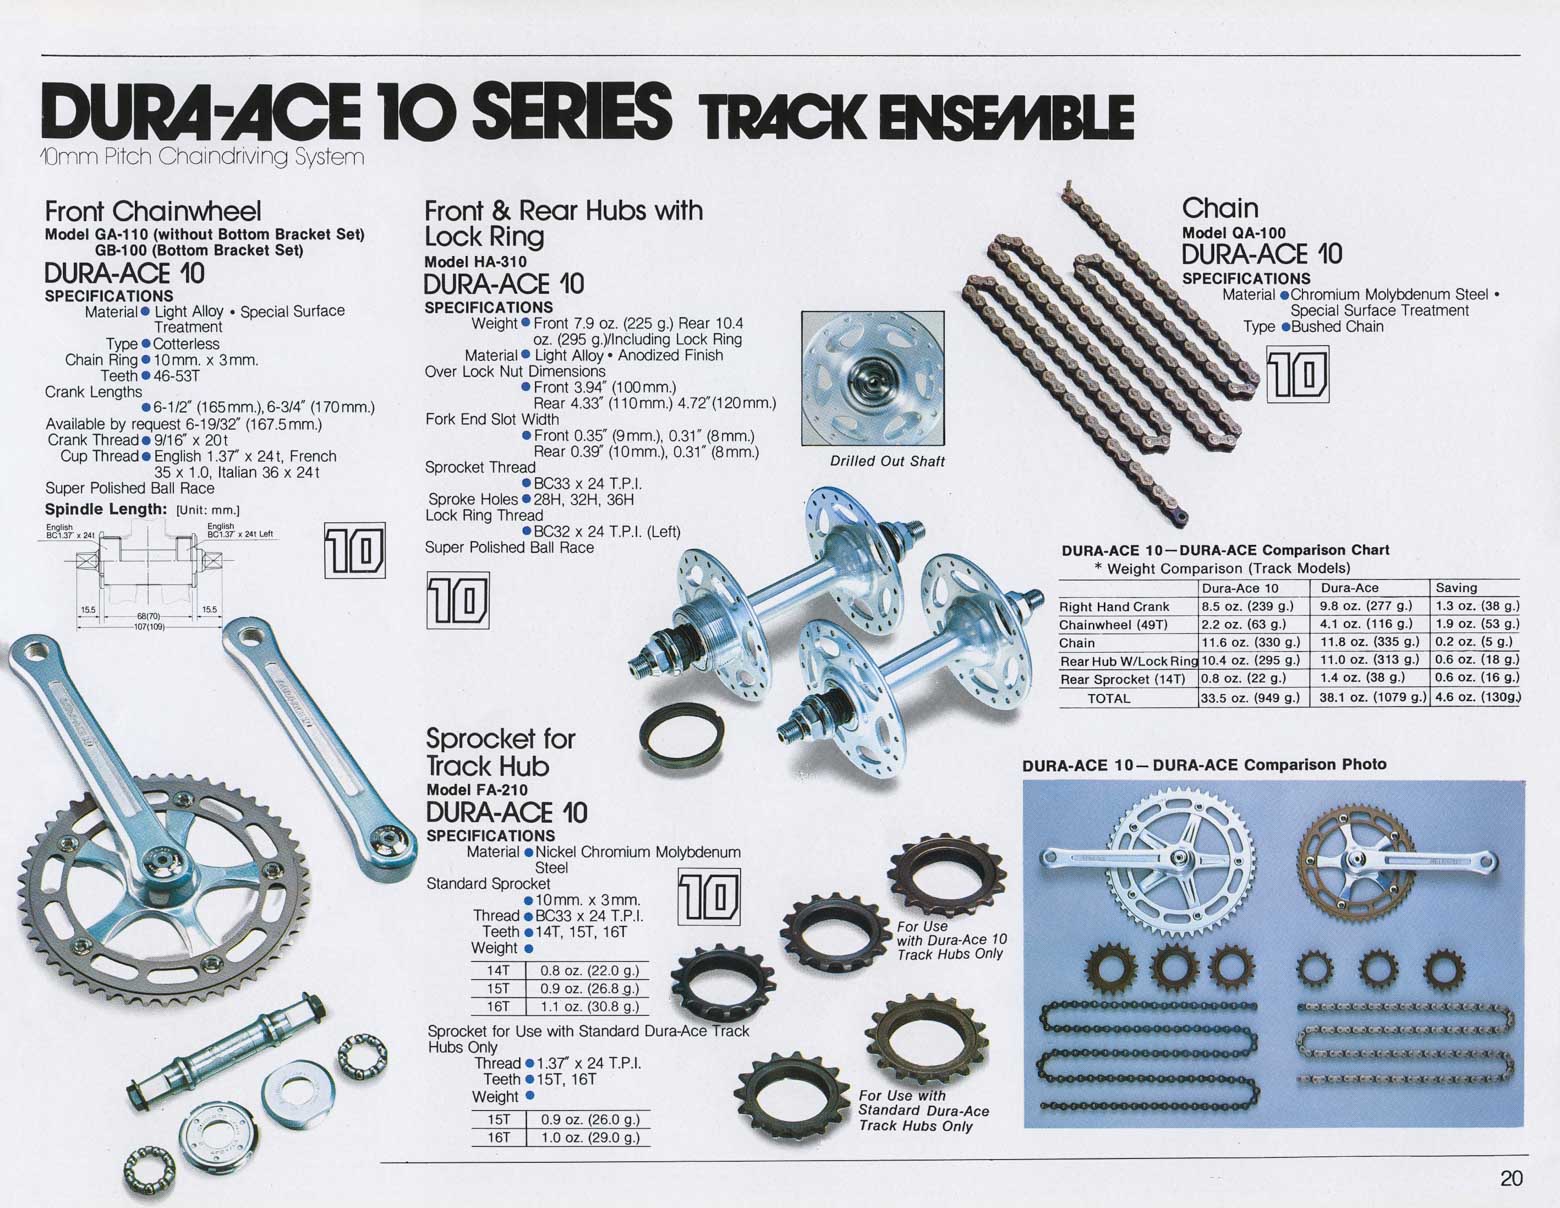 Shimano Bicycle System Components (December 1978) page 20 main image